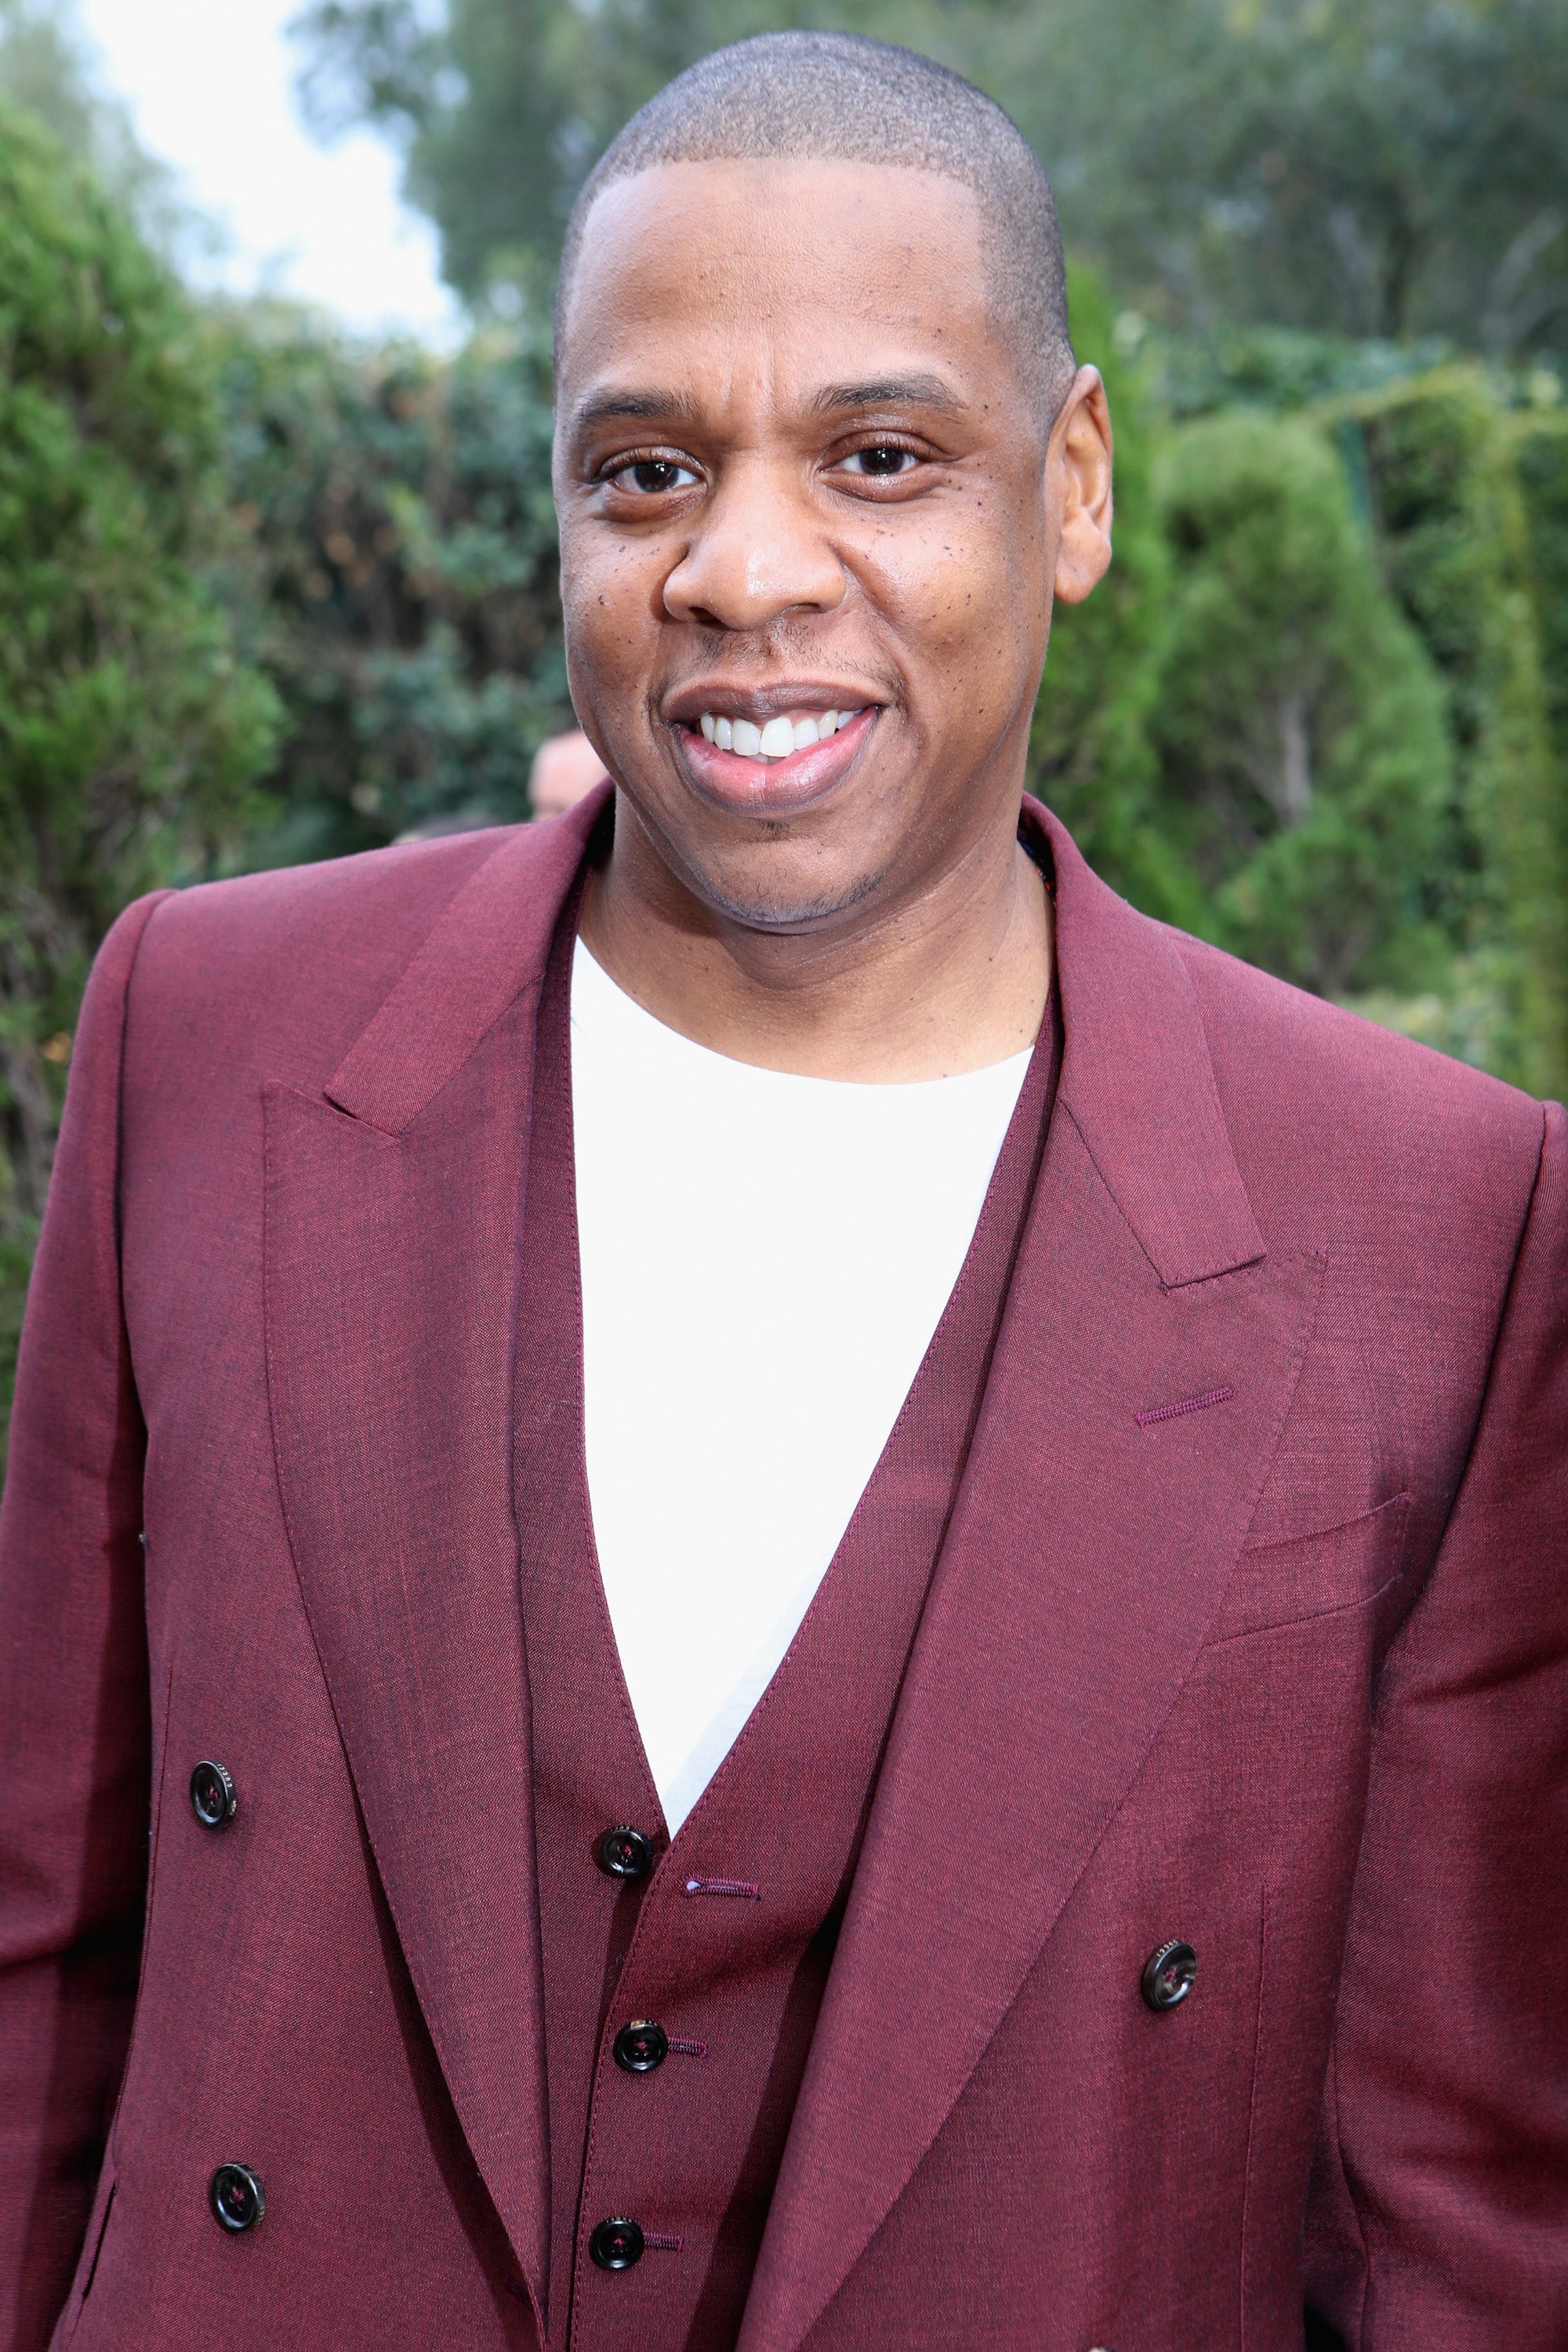 Jay-Z Questions Why We Don’t Support Black Entrepreneurs
